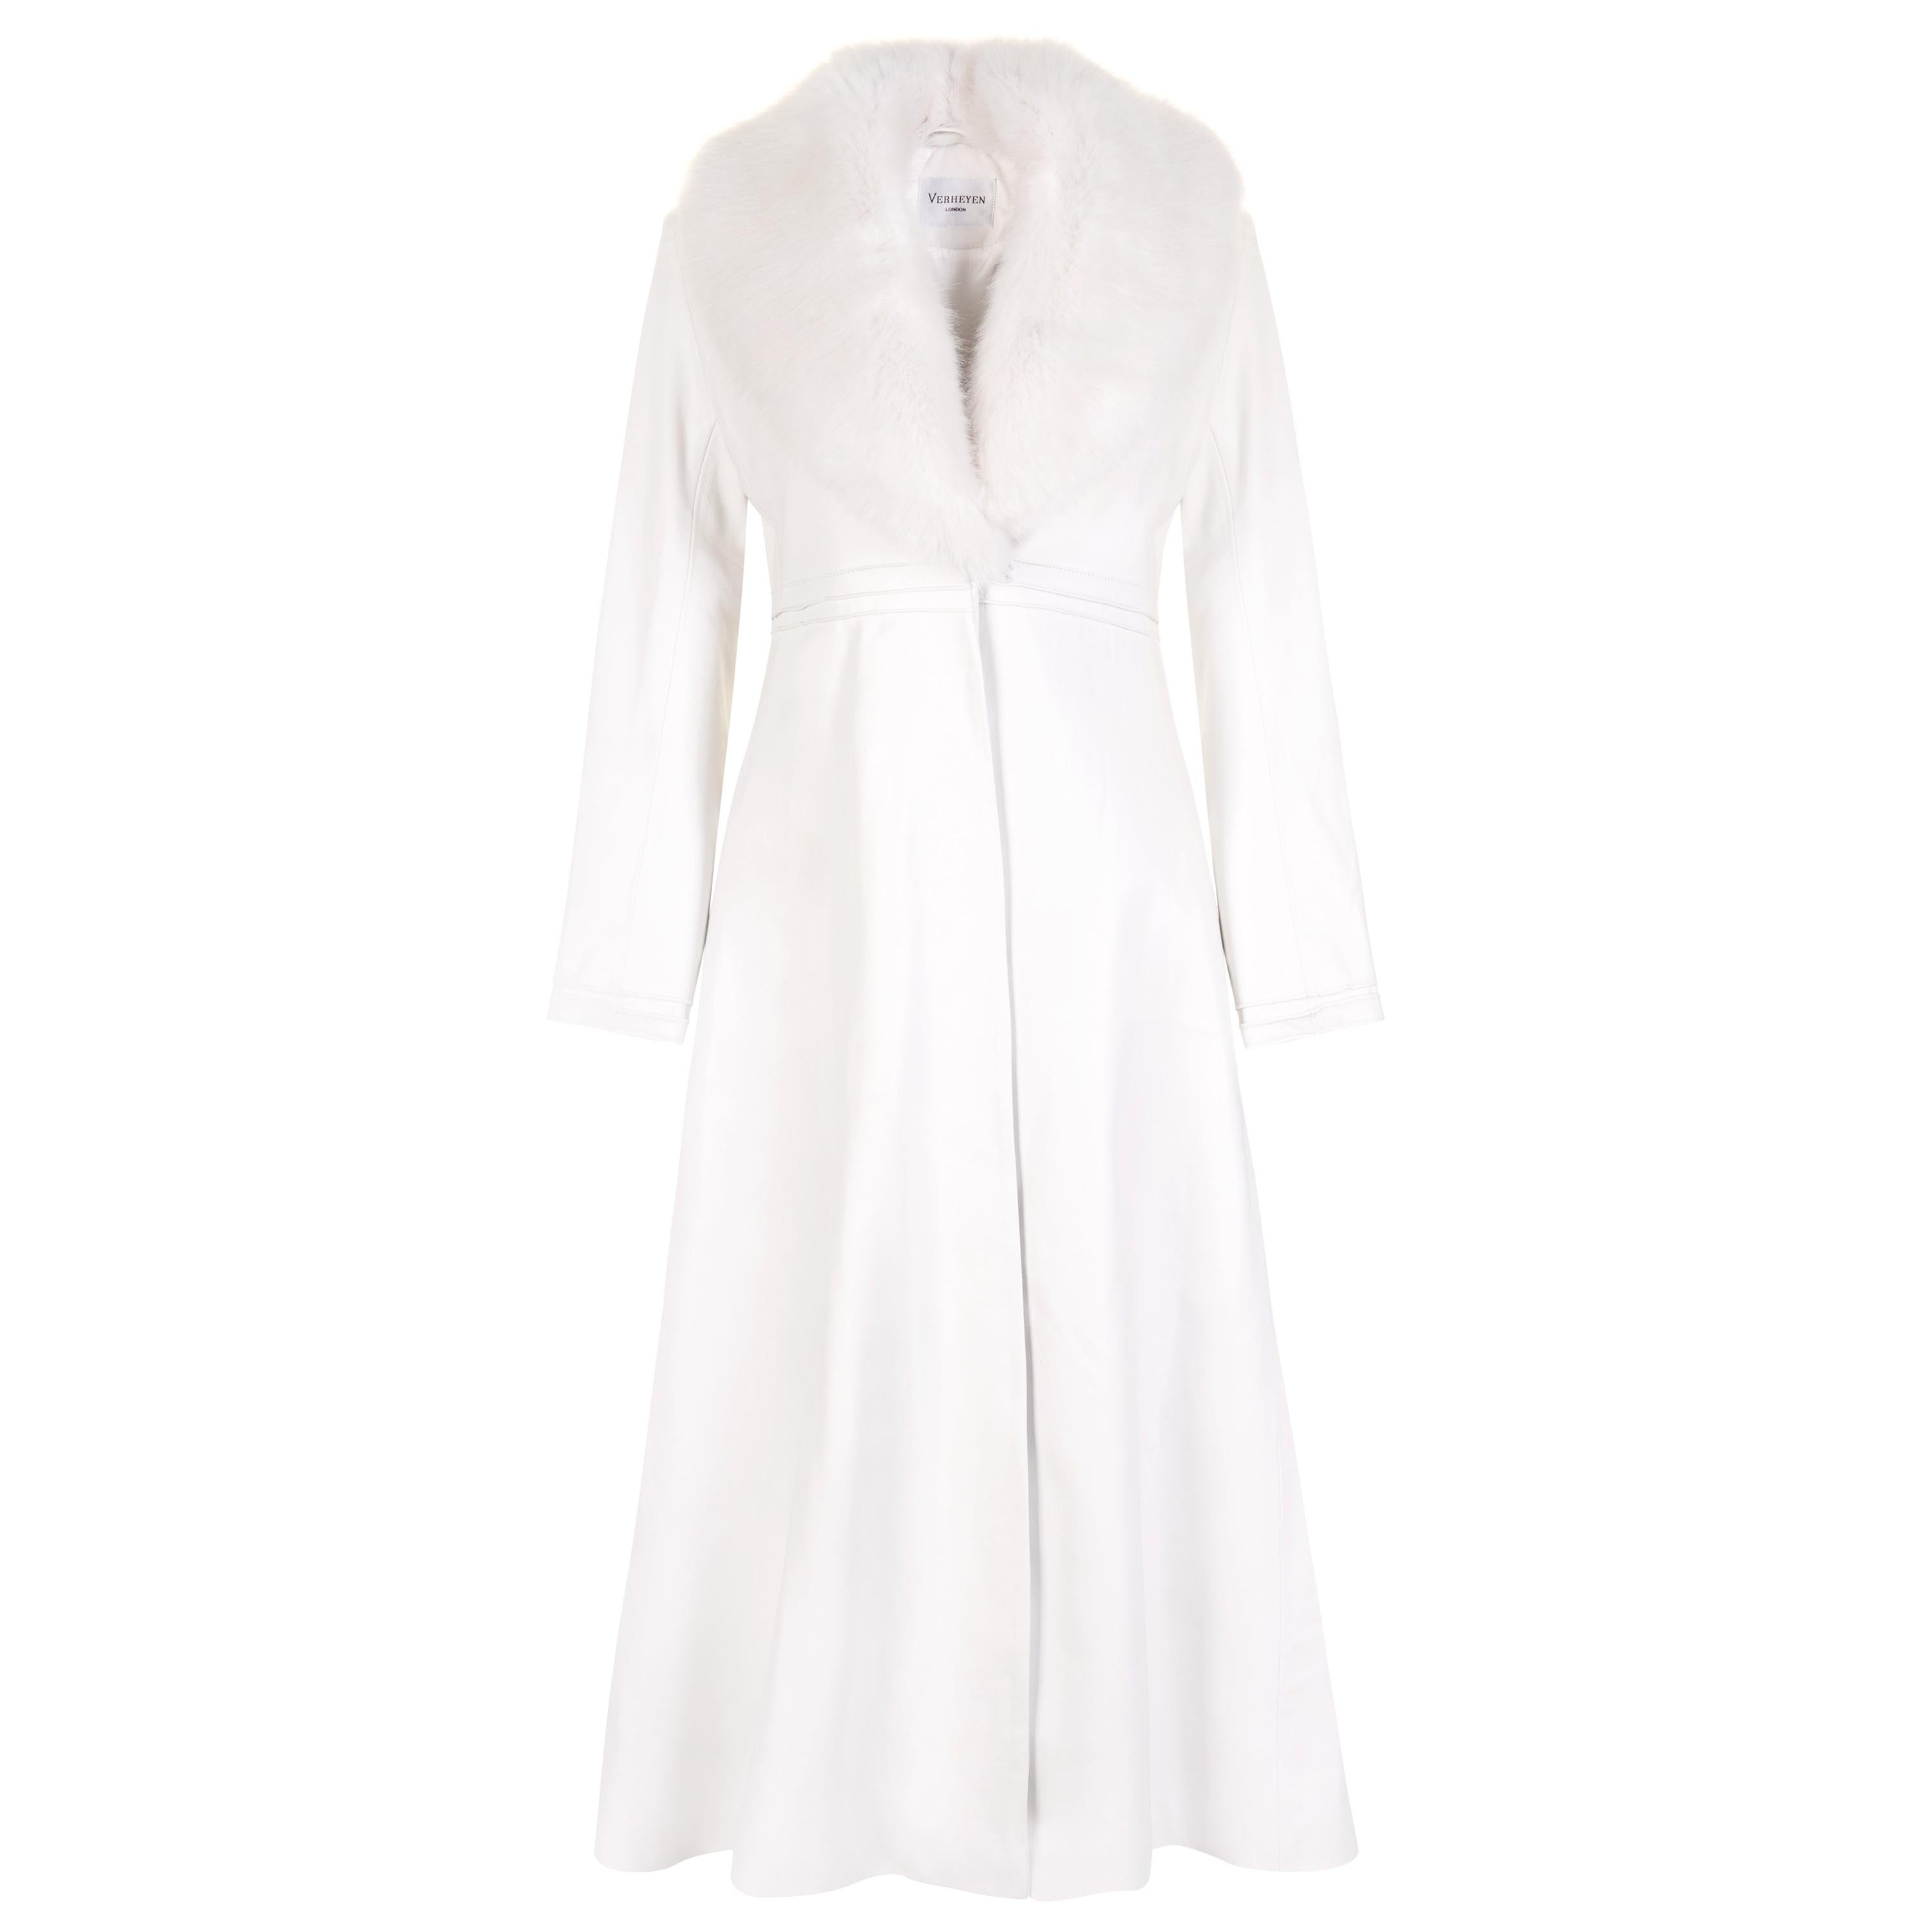 Verheyen London Edward Leather Coat in White with Faux Fur- Size uk 14

The Edward Leather Coat created by Verheyen London is a romantic design inspired by the 1970s and Edwardian Era of Fashion.  A timeless design to be be worn for a lifetime and